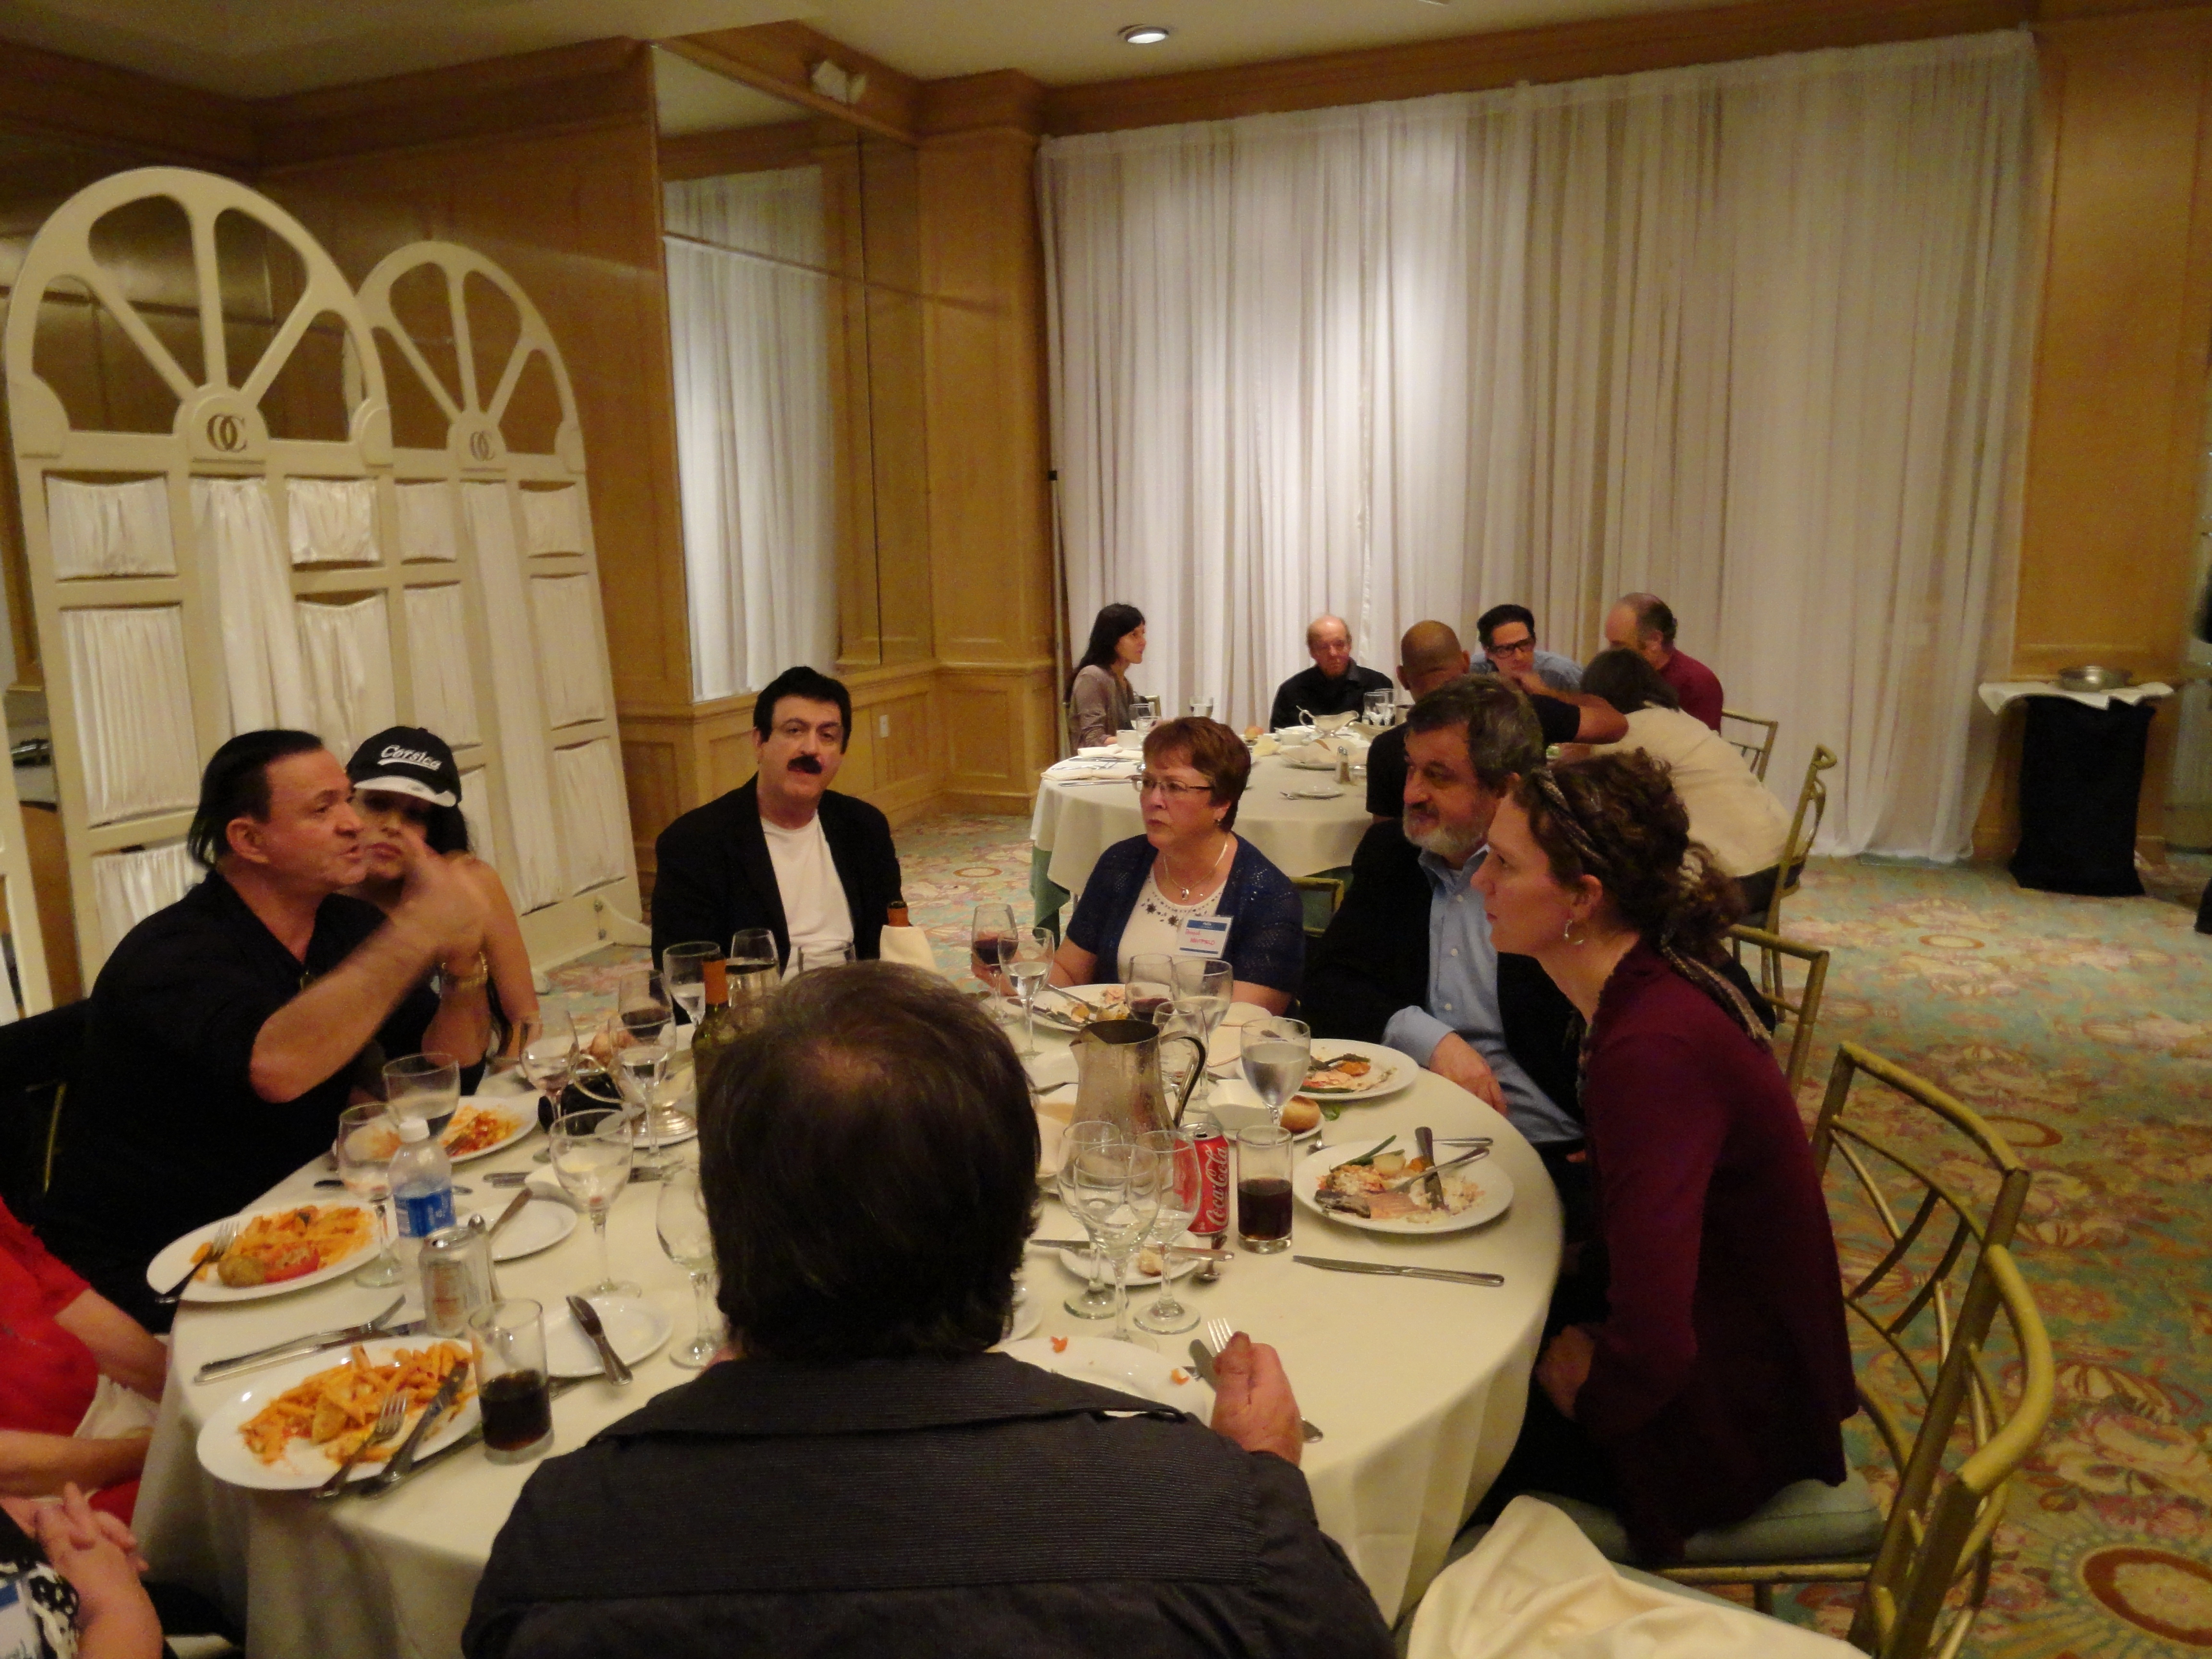 BANQUET LUNCH WITH GEORGE NOORY